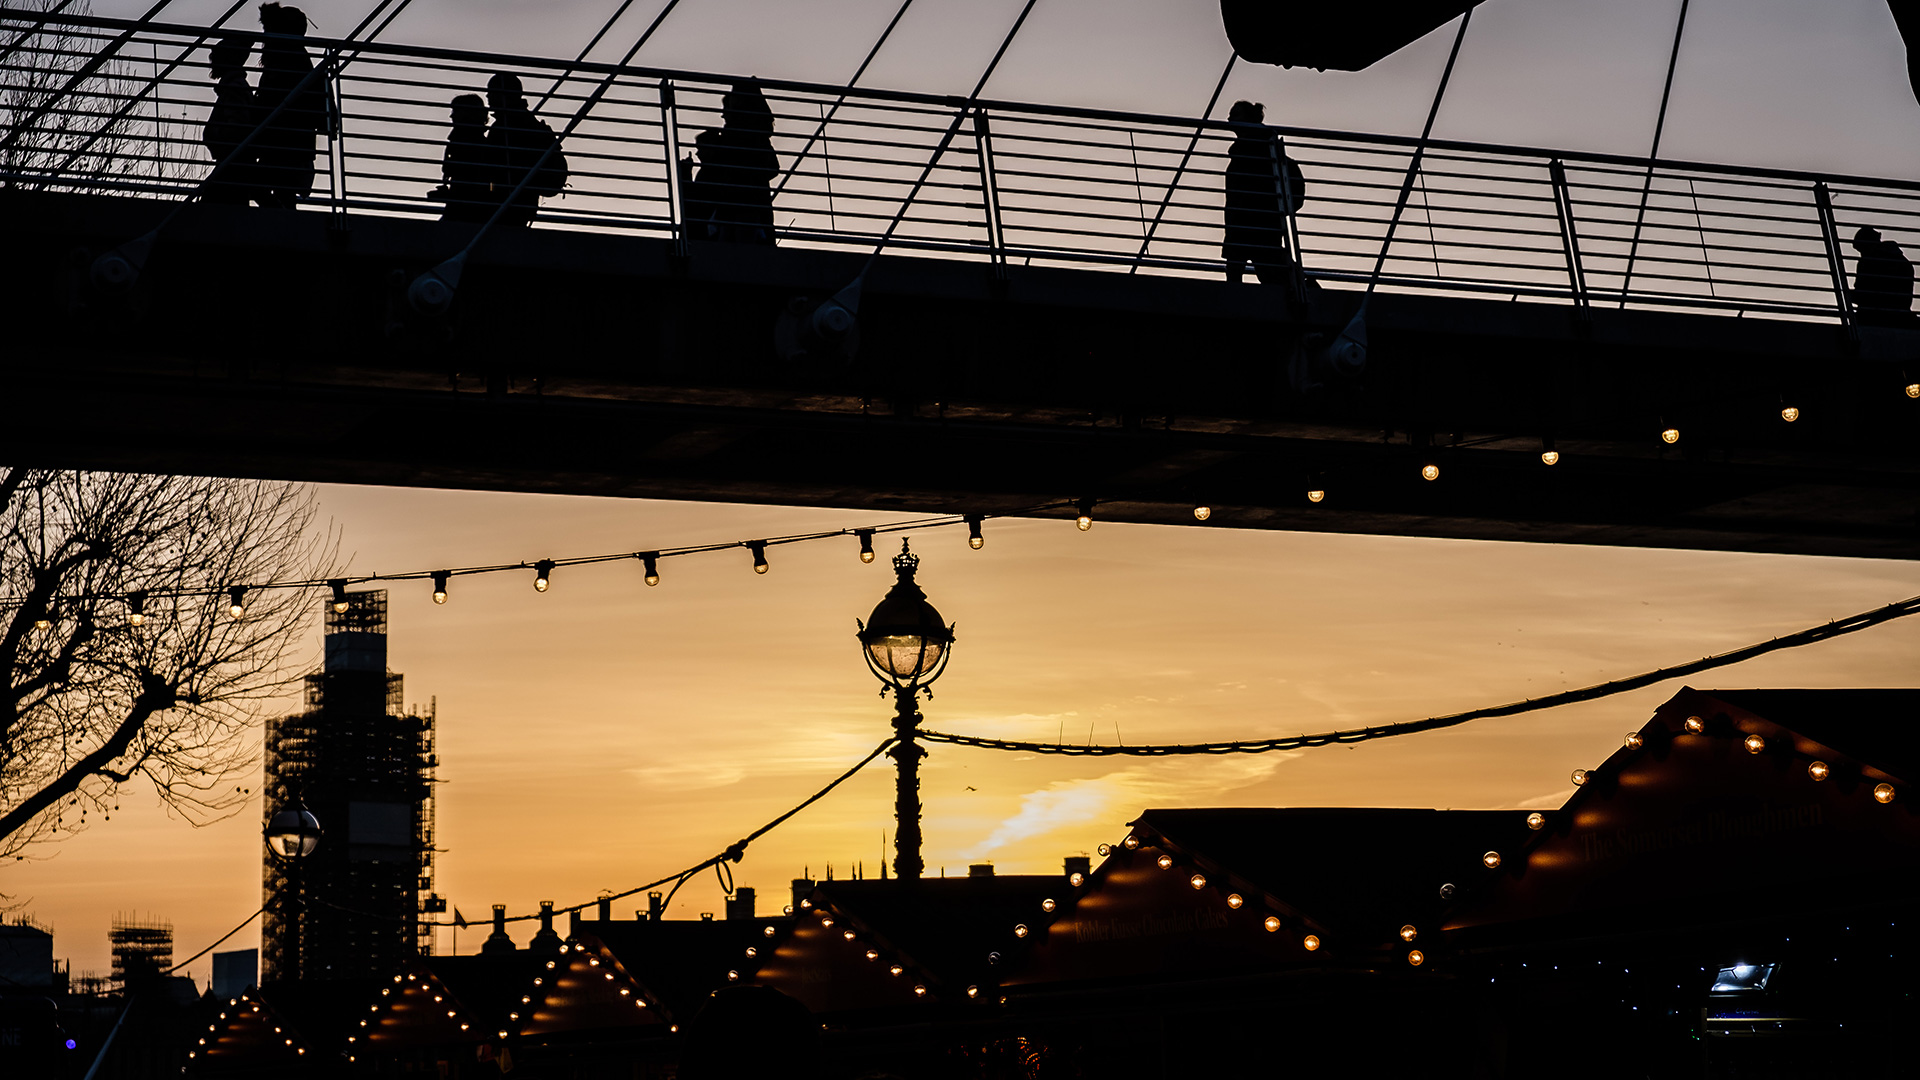 The sun sets over one of London's Christmas markets as commuters head home over Hungerford Bridge.